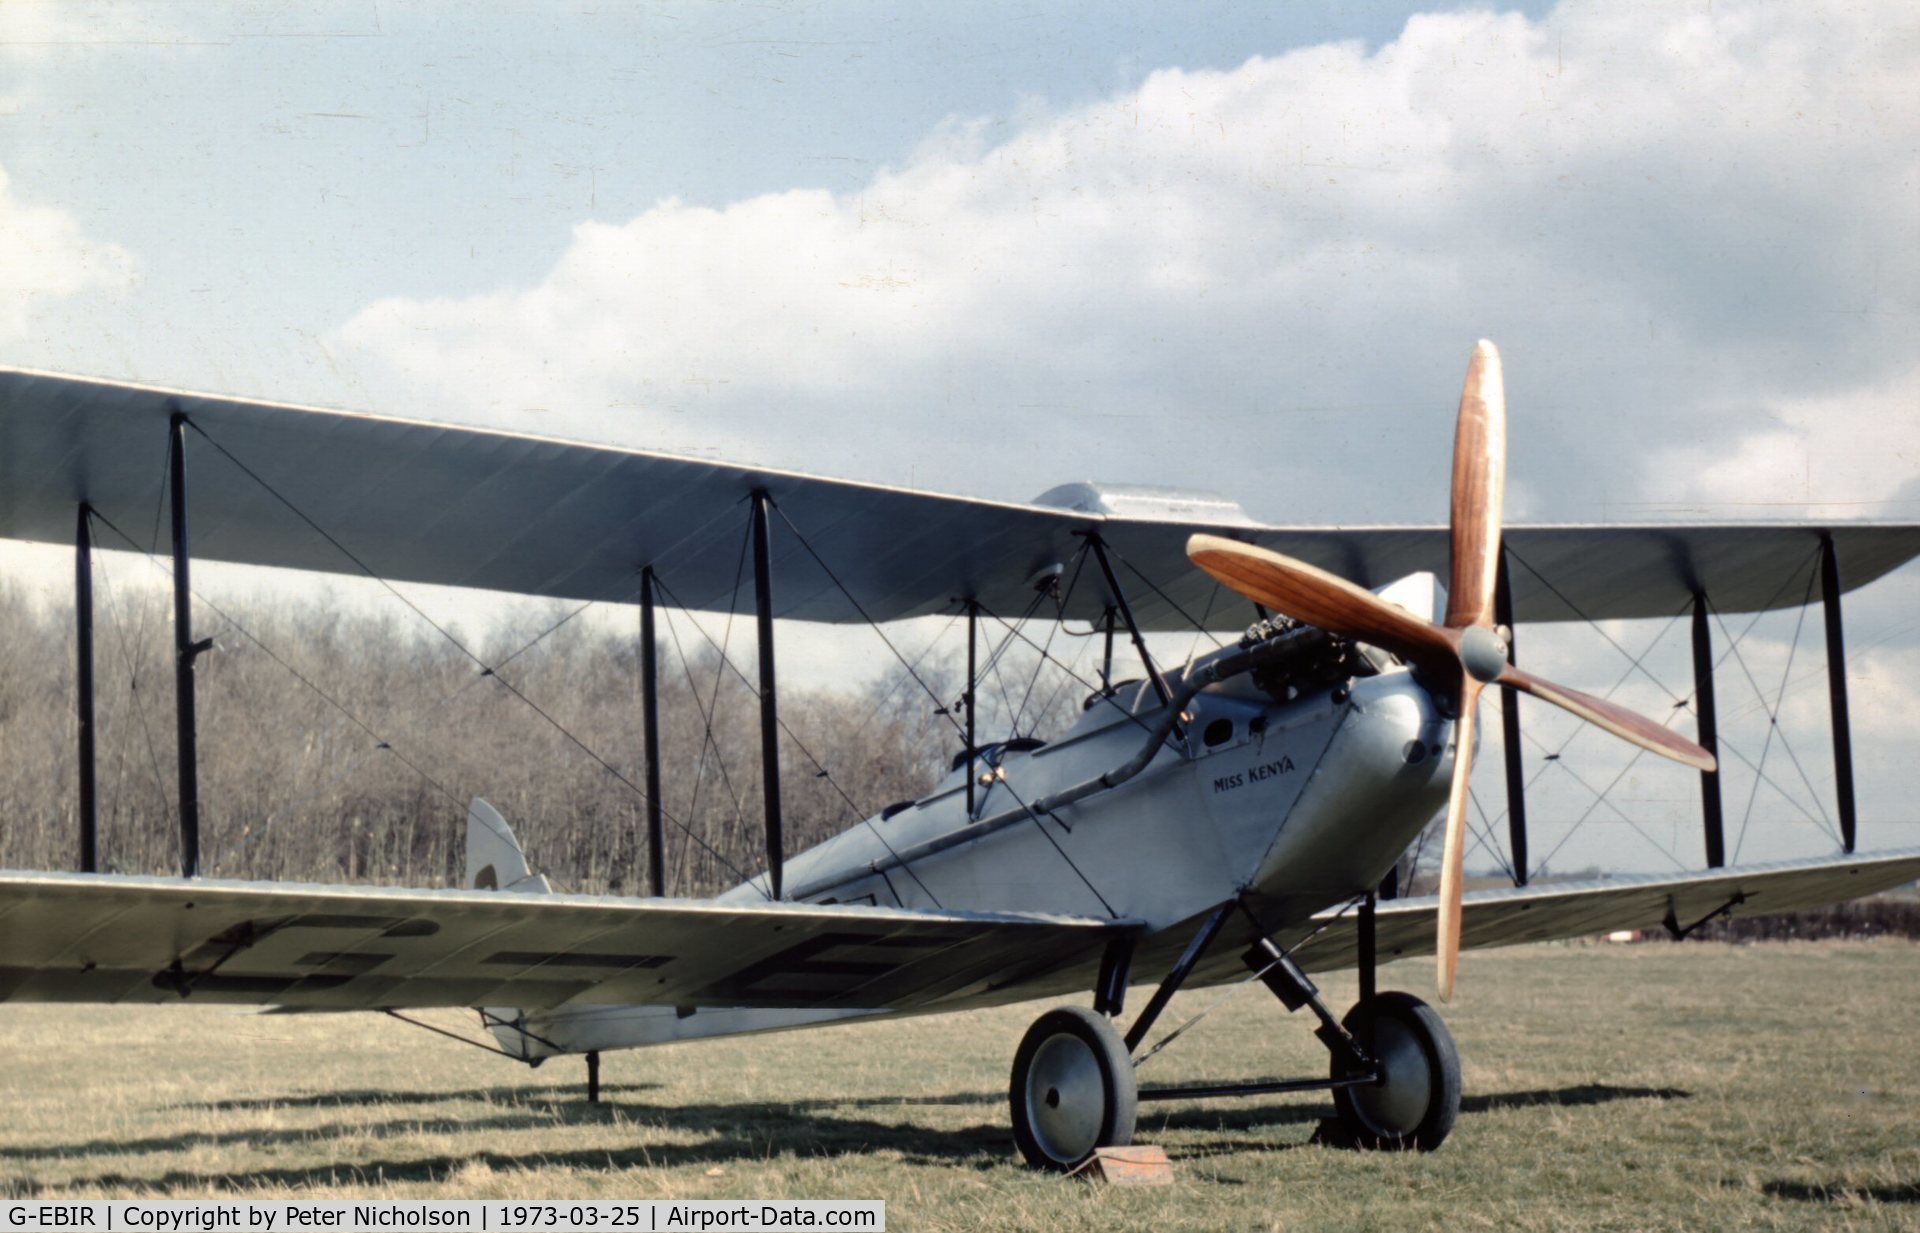 G-EBIR, 1924 De Havilland DH.51Moth C/N 102, Another view of the Shuttleworth Collection's Moth at their display at Old Warden in the Spring of 1973.